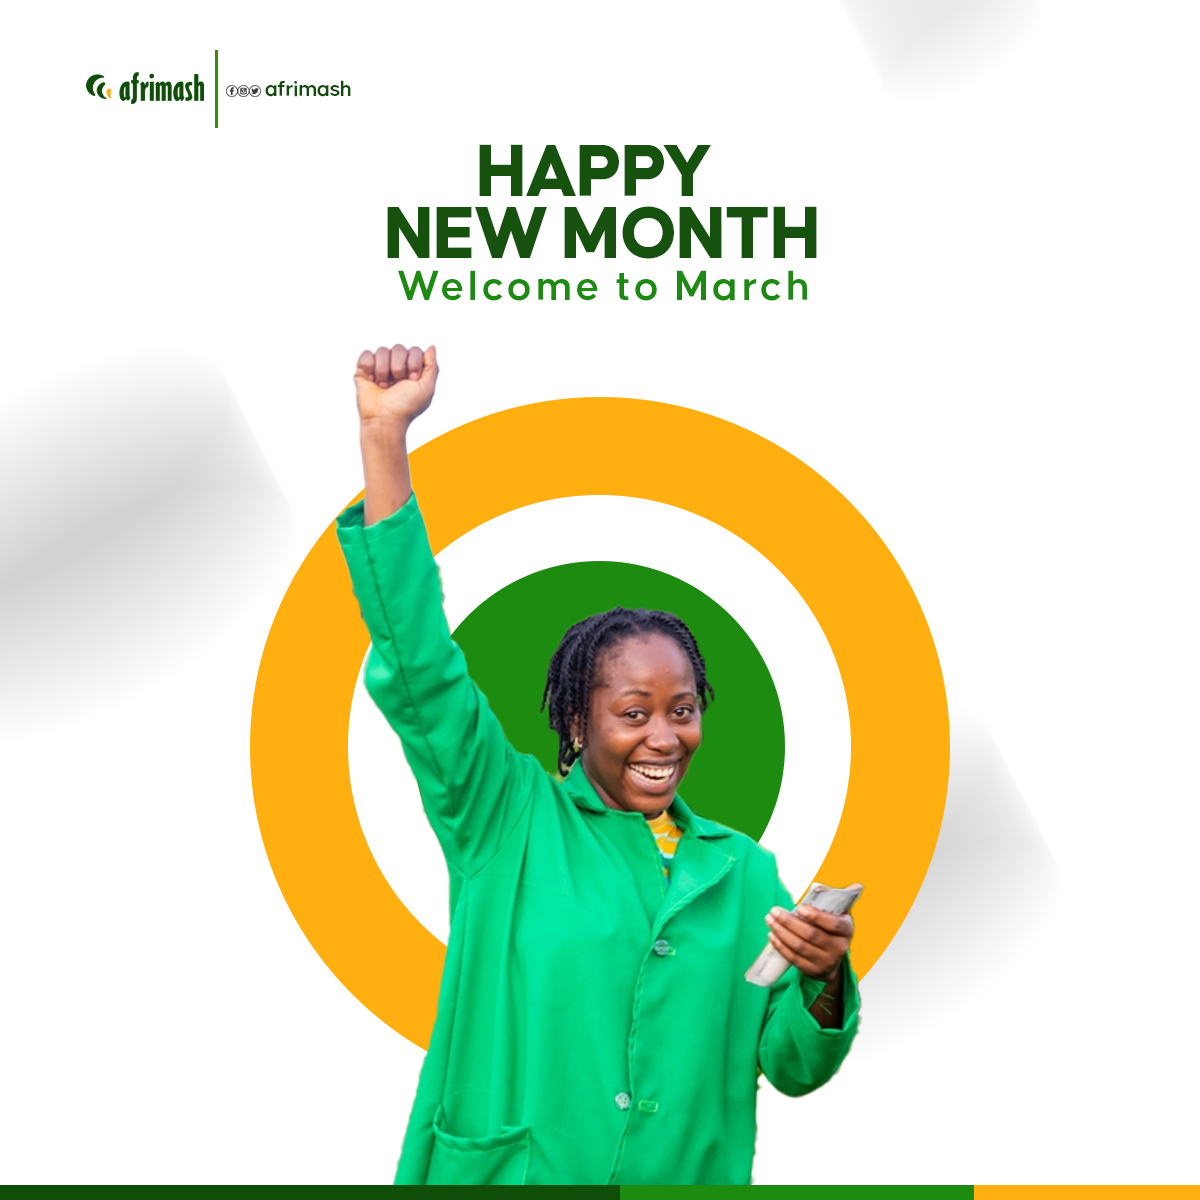 It's a new month, and we're excited to help you achieve your farming goals. 

Whether you need livestock feeds, farming equipment, or veterinary services, we've got you covered. 

Let's make this month a fruitful one!

#afrimash #newmonth #happynewmonth #farmersinnigeria